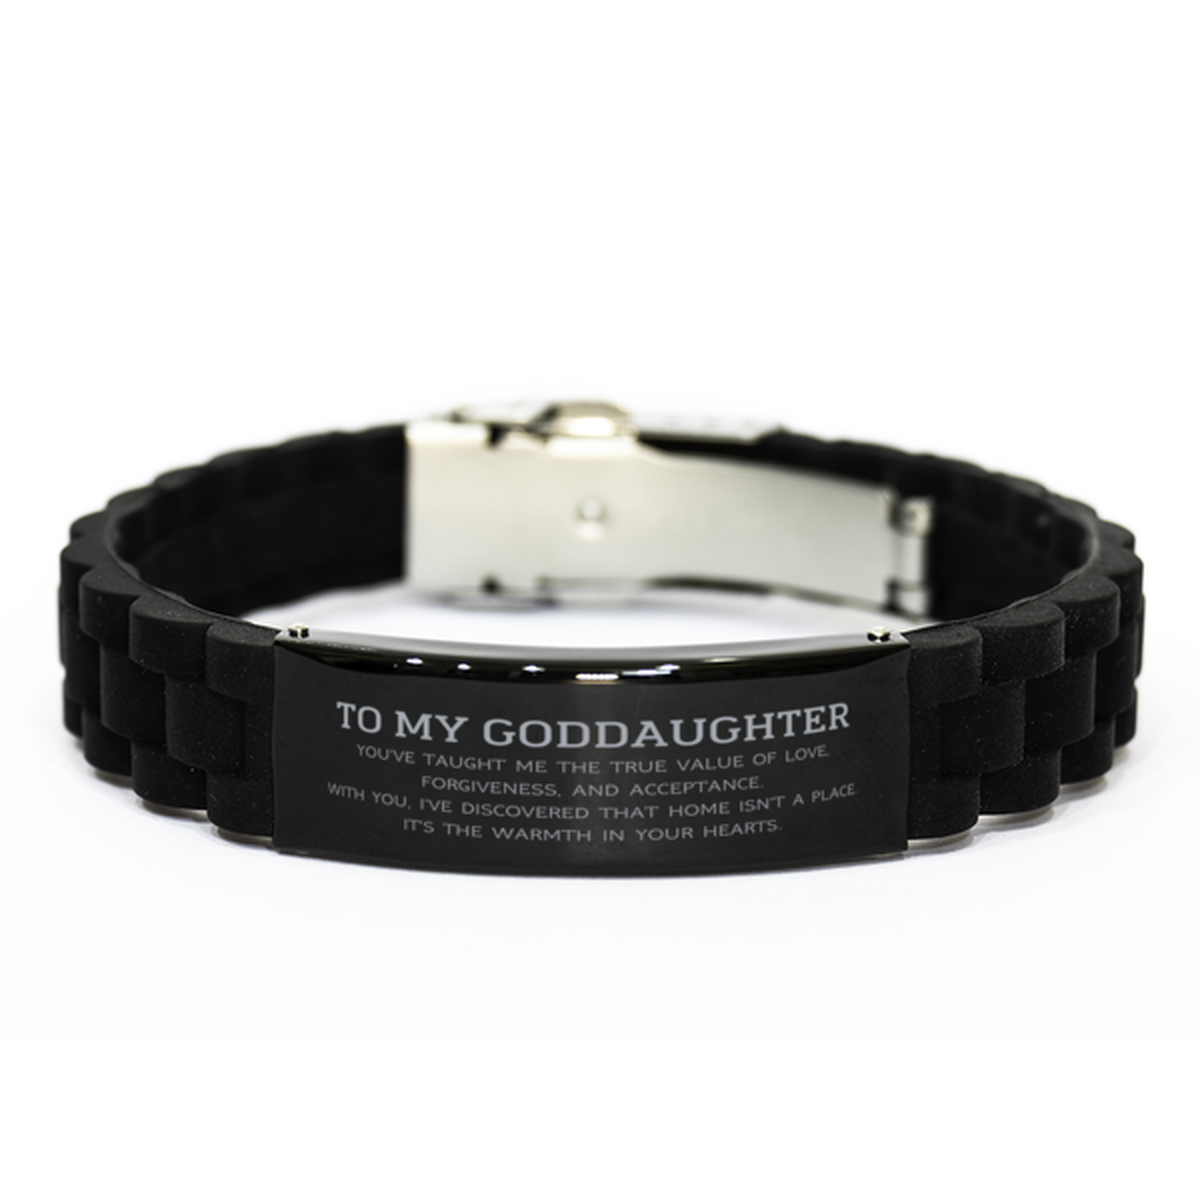 To My Goddaughter Gifts, You've taught me the true value of love, Thank You Gifts For Goddaughter, Birthday Black Glidelock Clasp Bracelet For Goddaughter